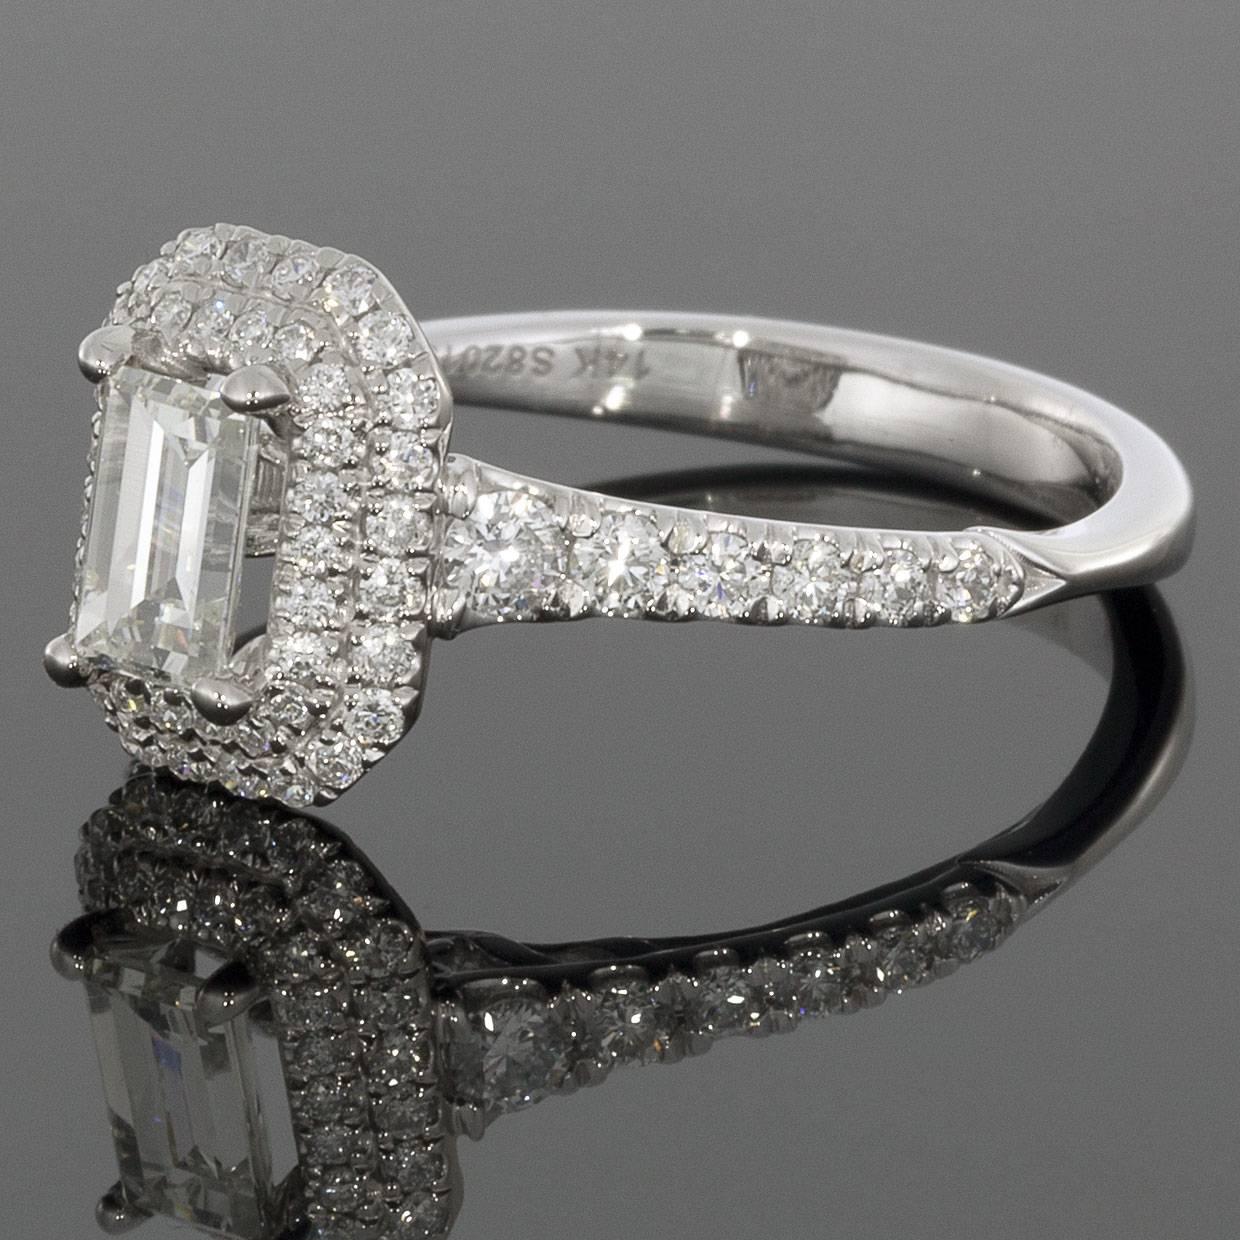 This classic diamond band would make a wonderful wedding band or anniversary ring. The ring is comprised of 14 karat white gold & features a double halo diamond design around a 0.50ct J/SI1. The ring is a finger size 6.5 & is sizable upon request.